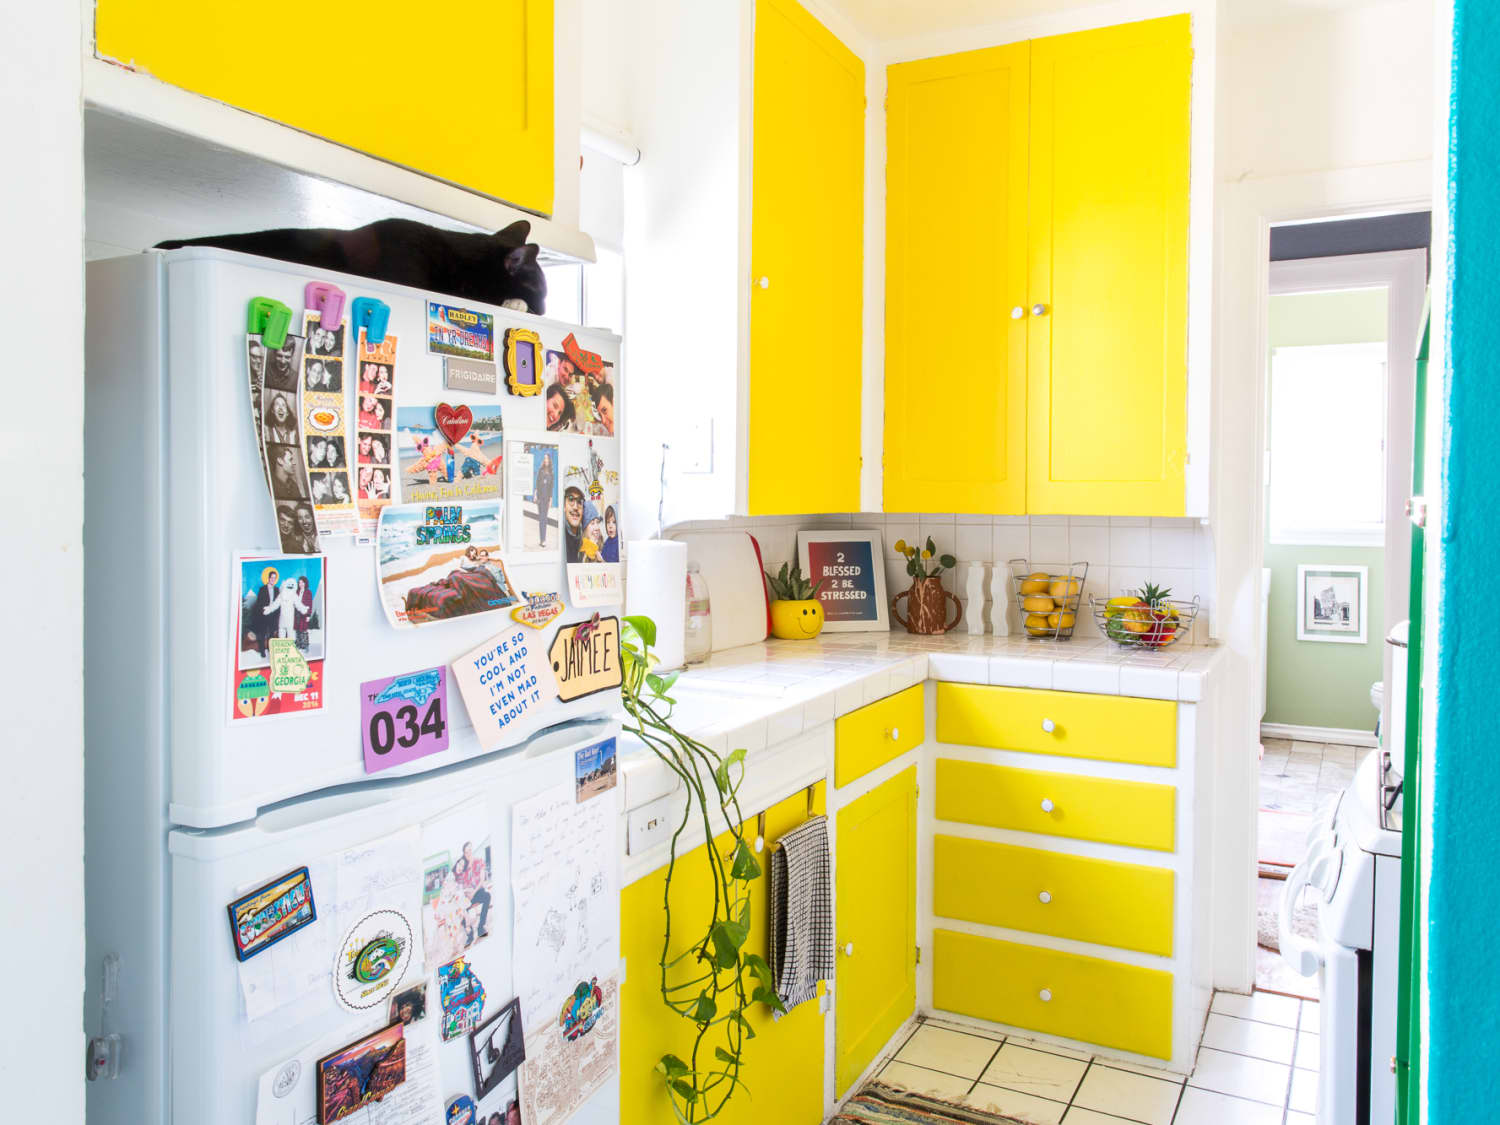 Today we are taking a look at the Make It Mini Kitchen to see